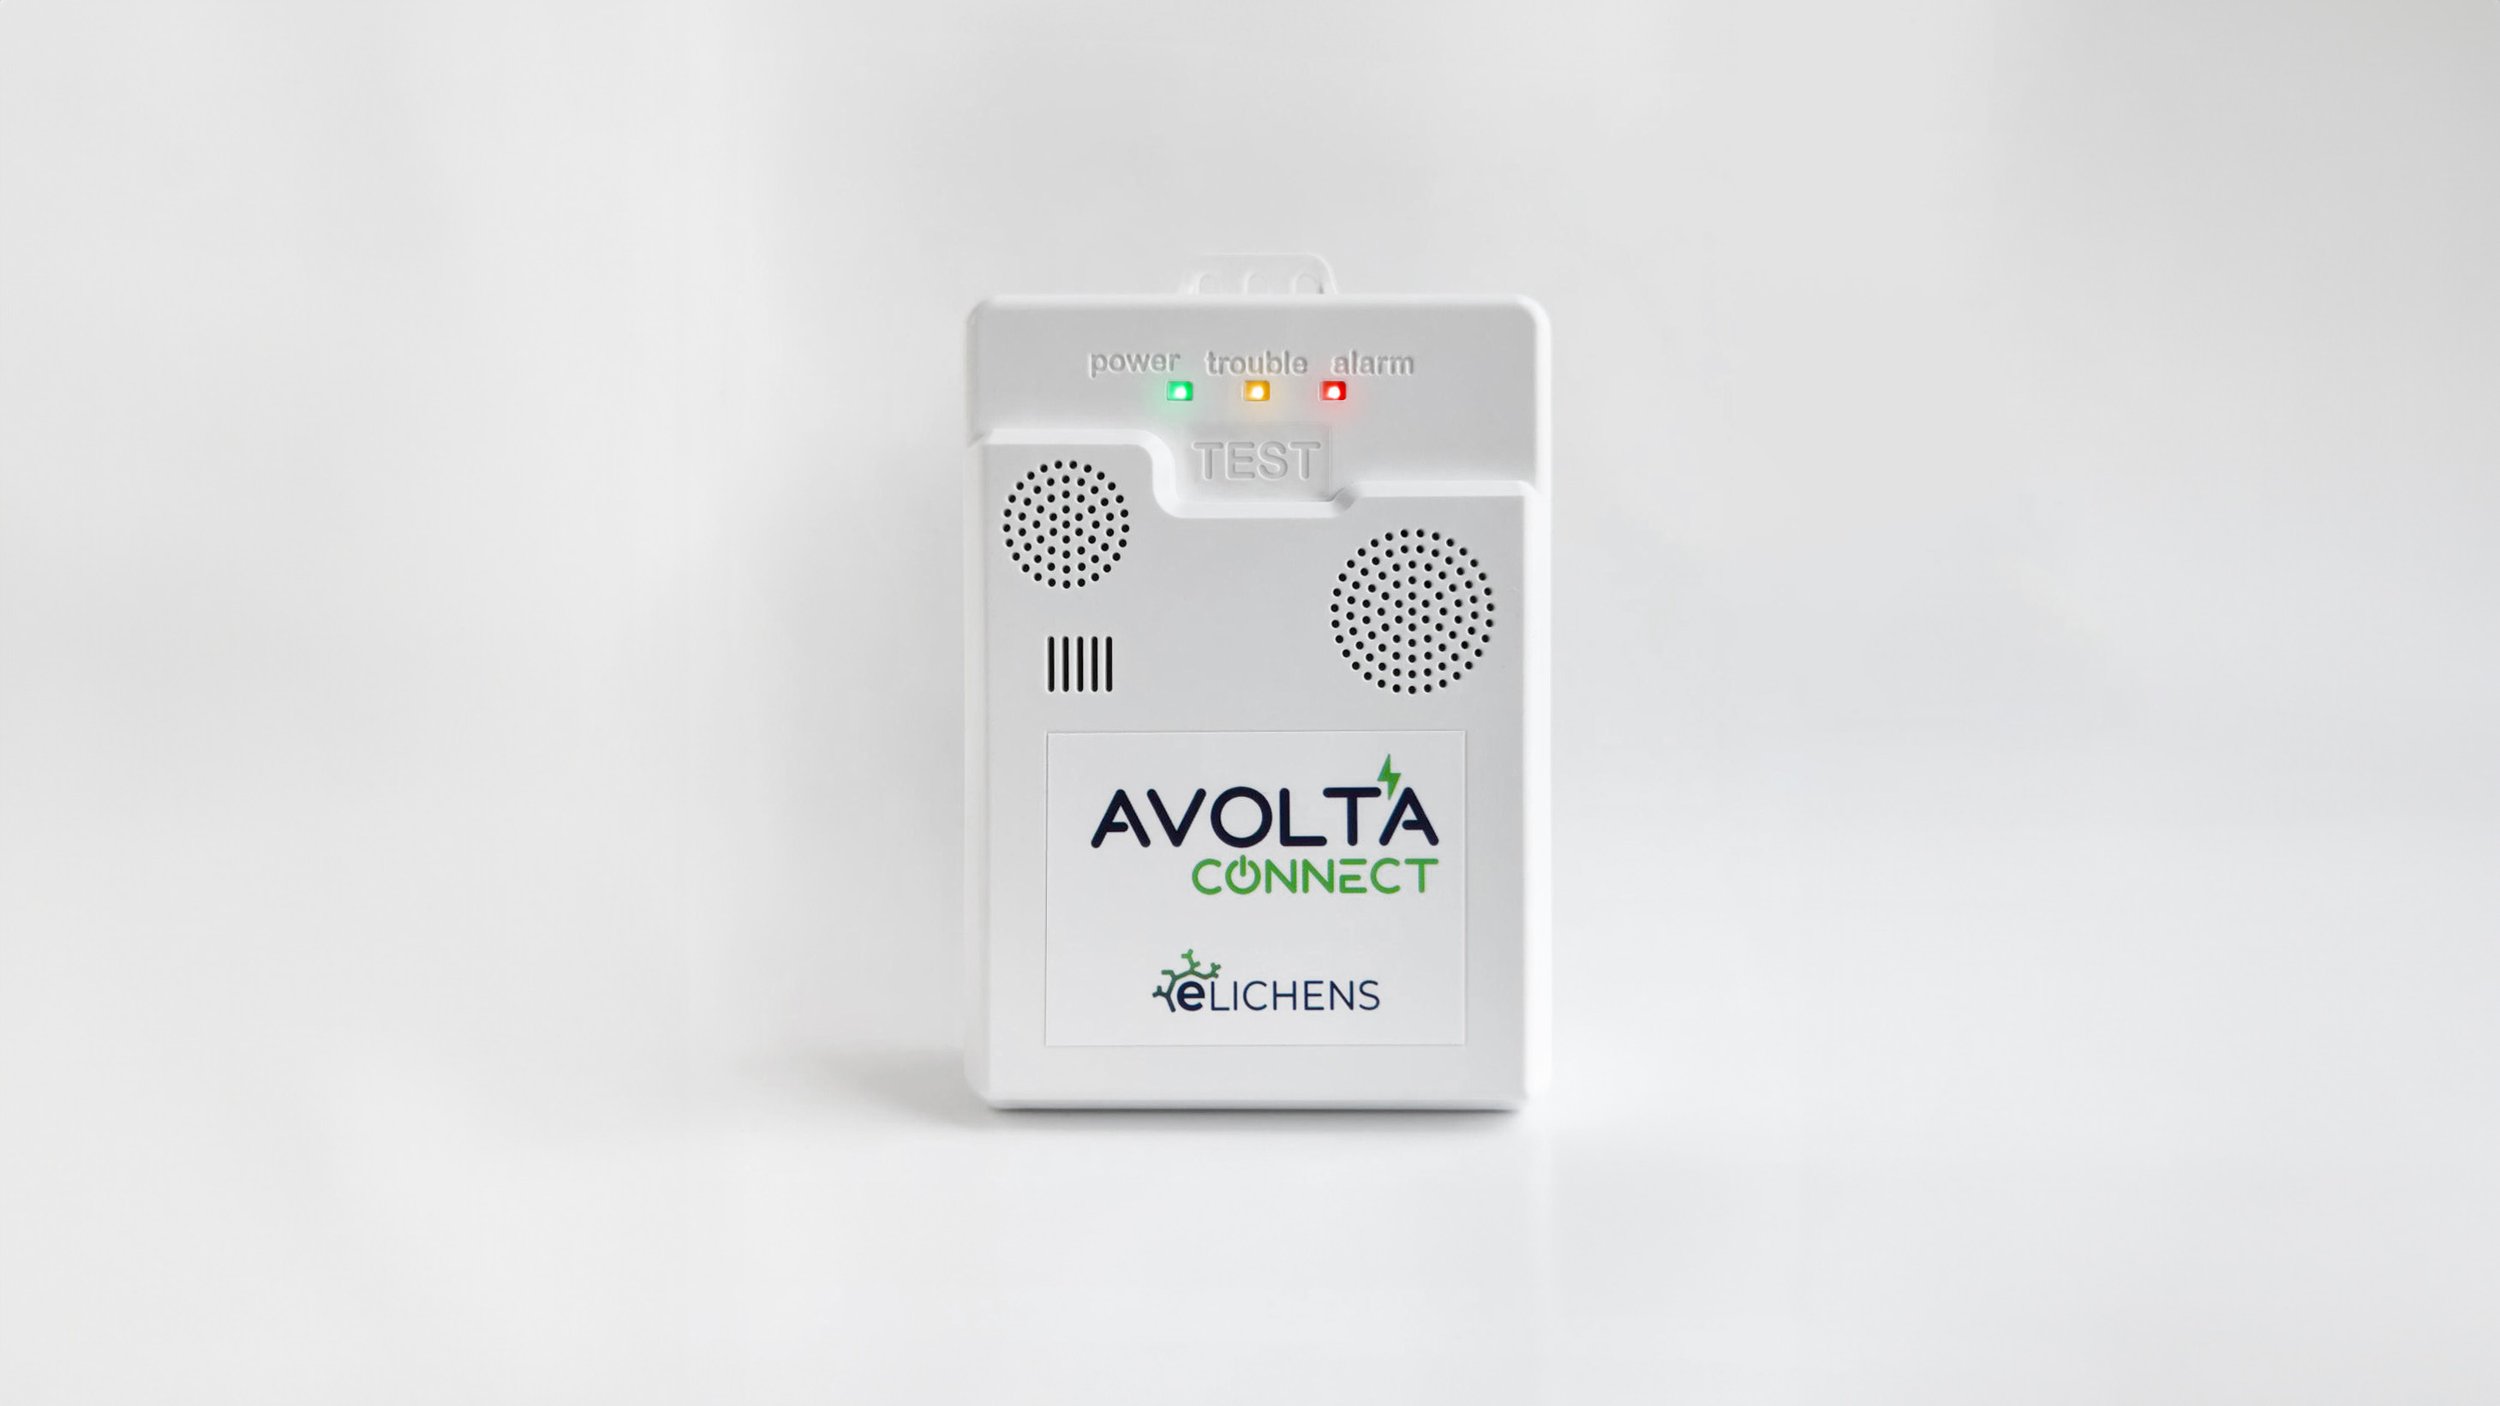   eLichens’ advanced Natural Gas Detector    Avolta Connect    Learn More  